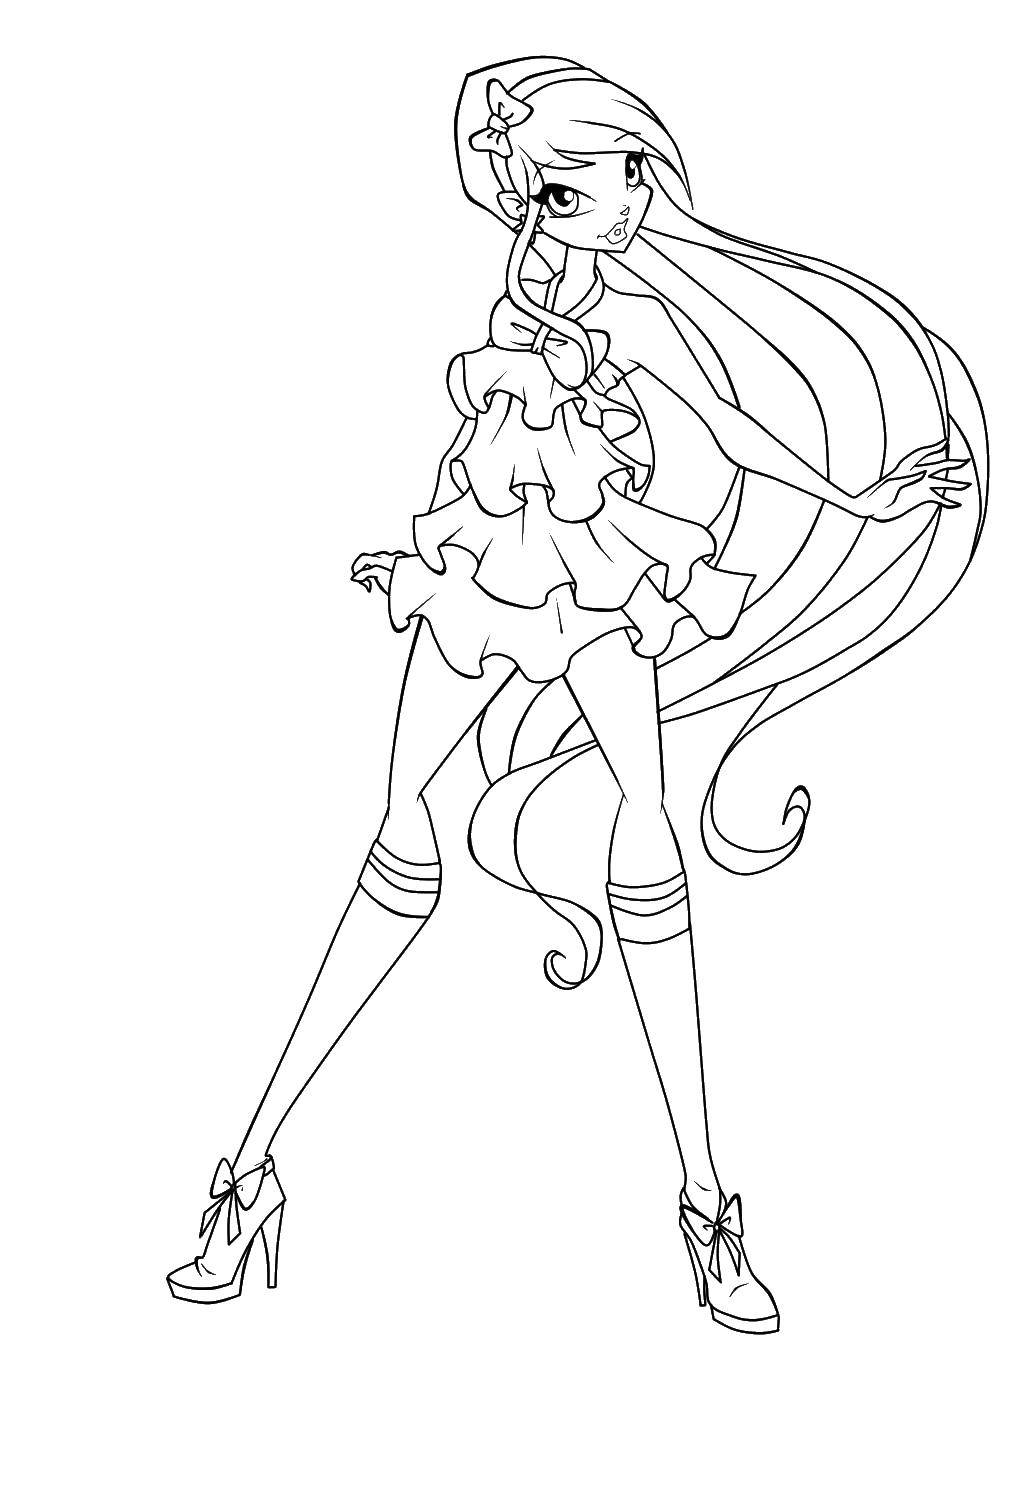 Coloring One of the fairies winx. Category Winx. Tags:  girl, doll, Barbie, Winx.